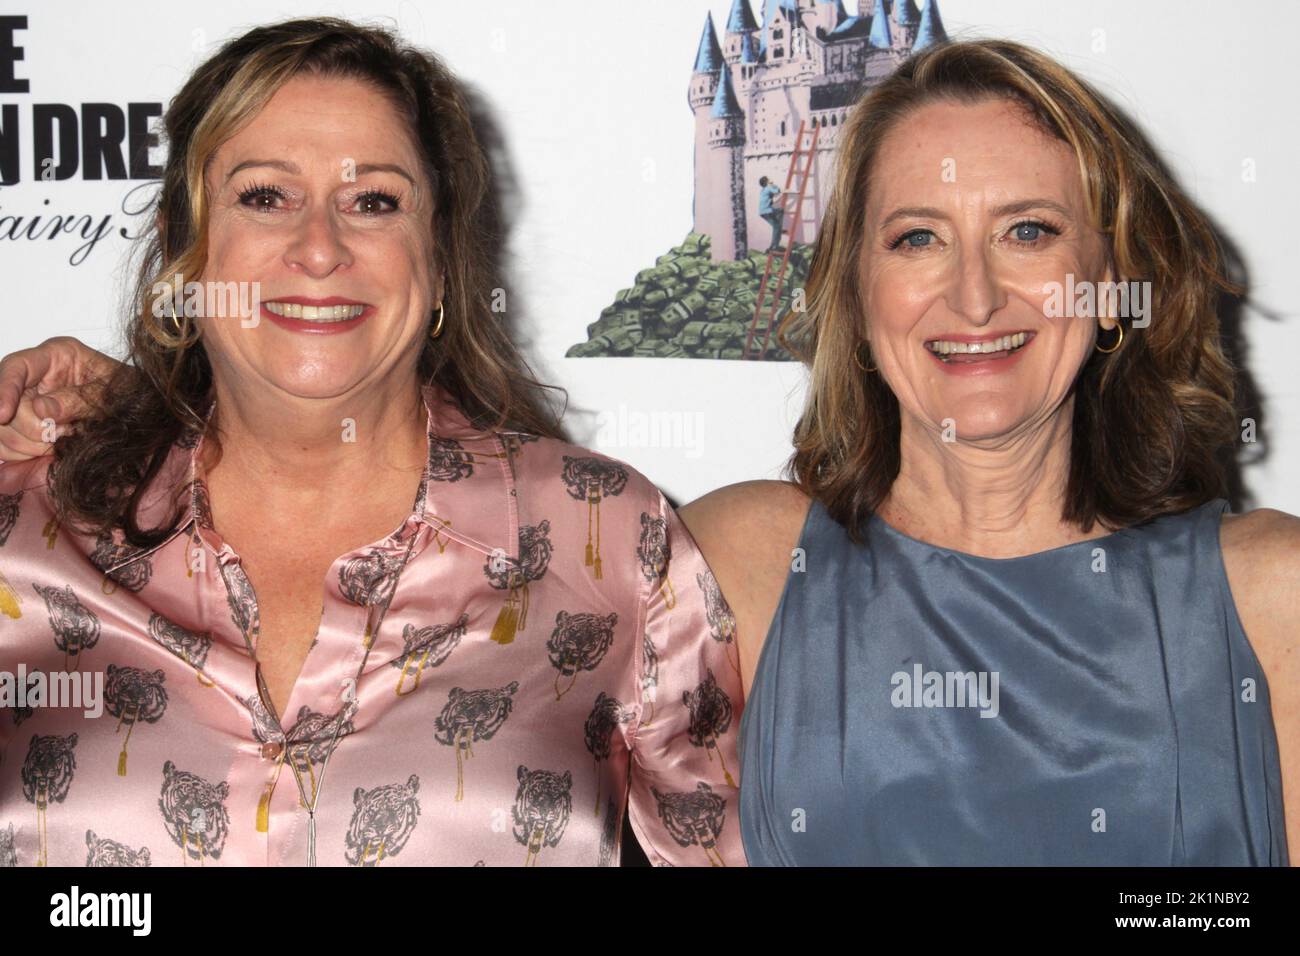 Orange, USA. 18th Sep, 2022. Abigail E. Disney, Kathleen Hughes 09/18/2022 The Anaheim Premiere of The American Dream and Other Fairy Tales held at the Century Stadium 25 and XD in Orange, CA Photo by Hana Umemoto/HollywoodNewsWire.net Credit: Hollywood News Wire Inc./Alamy Live News Stock Photo